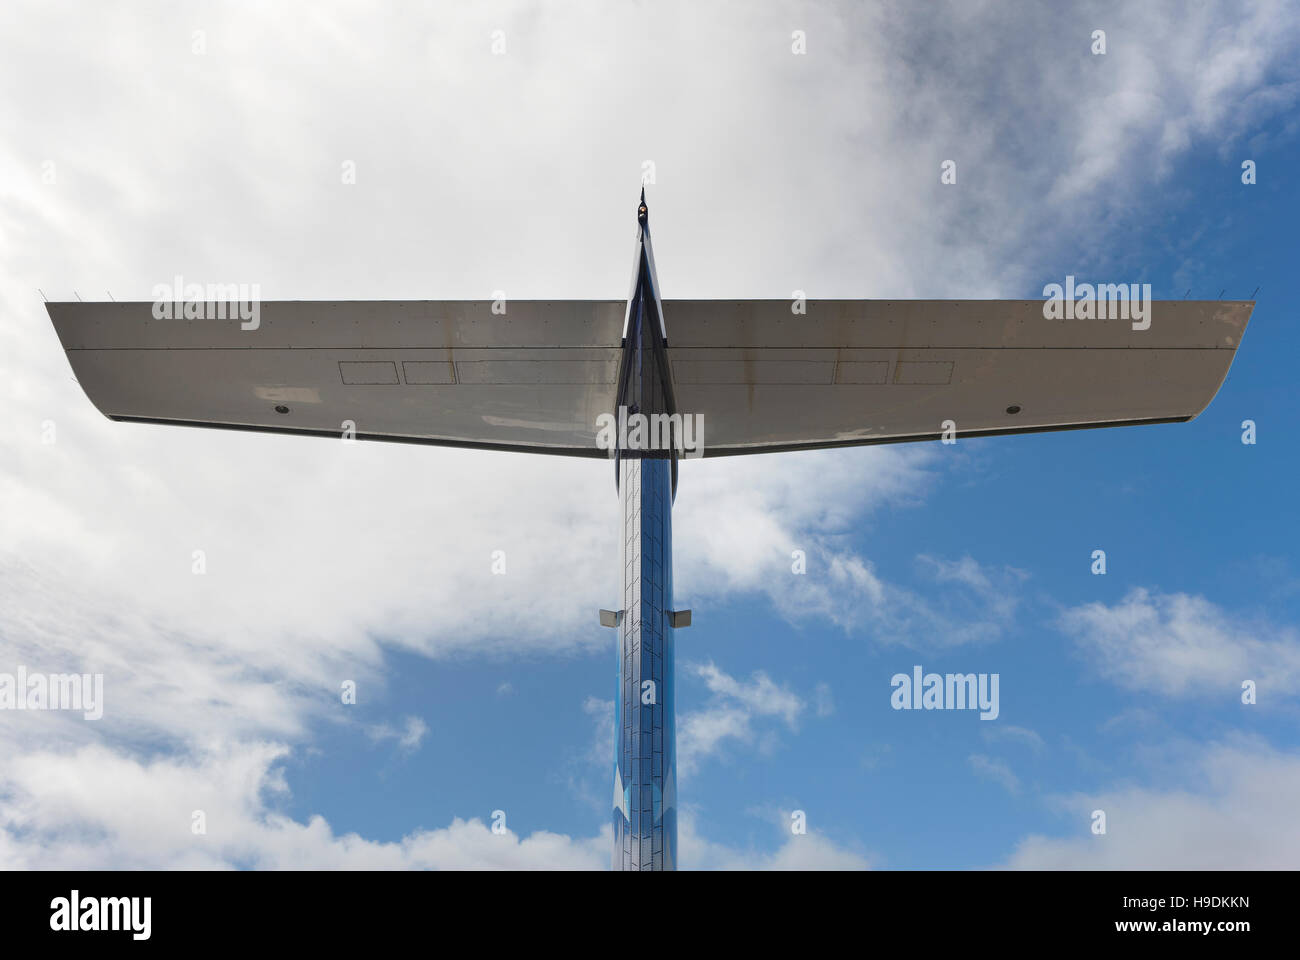 Airplane wing tale viewed from below with blue sky. Horizontal Stock Photo